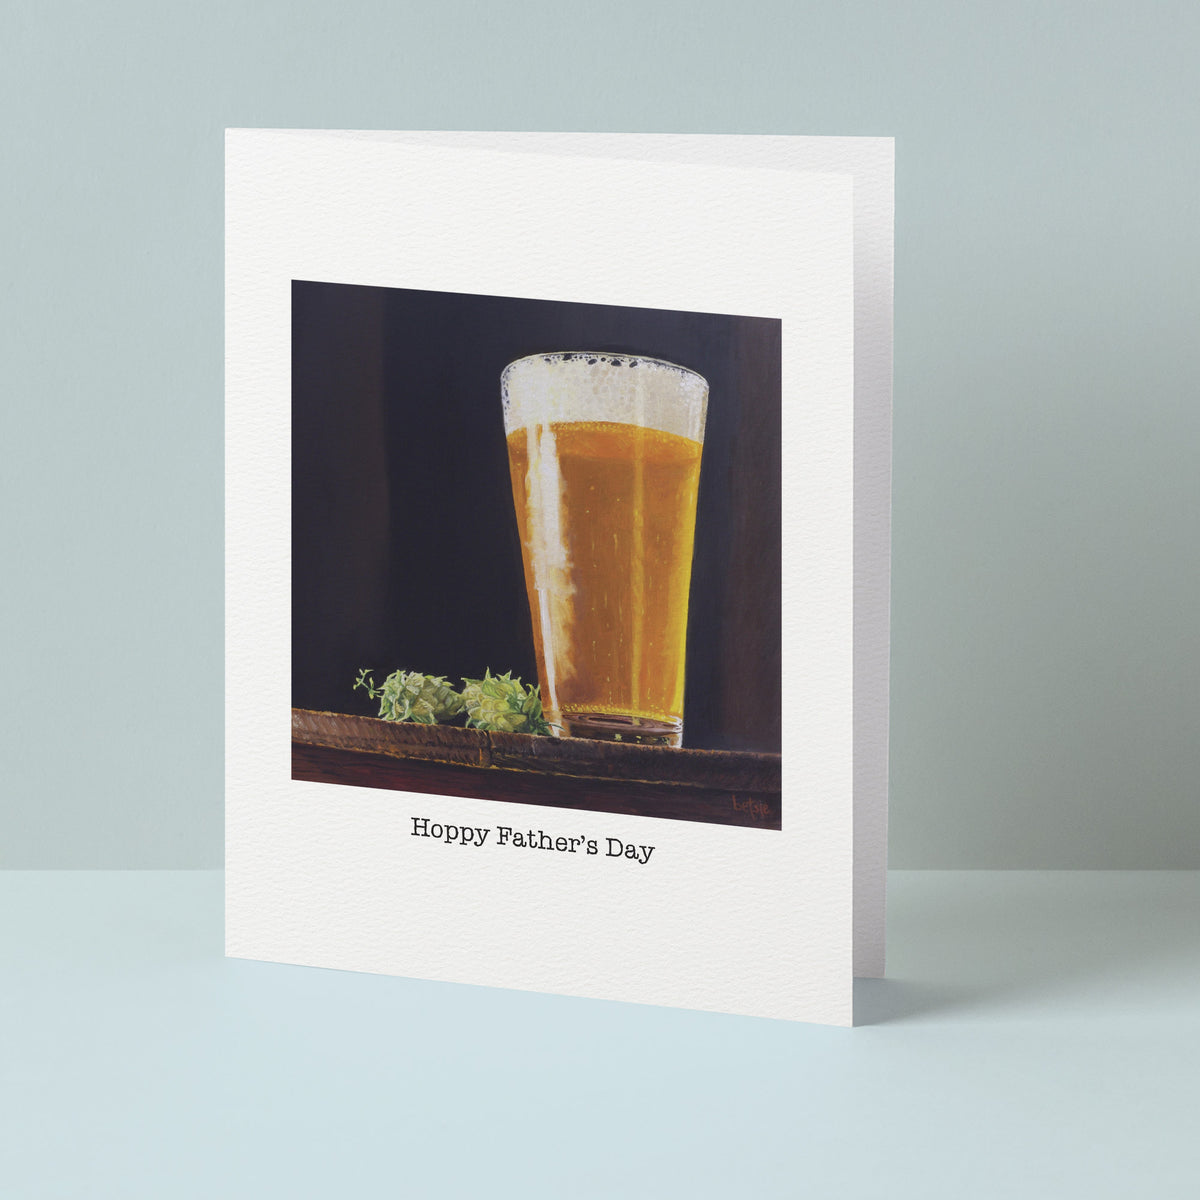 "Hoppy Father's Day" Greeting Card